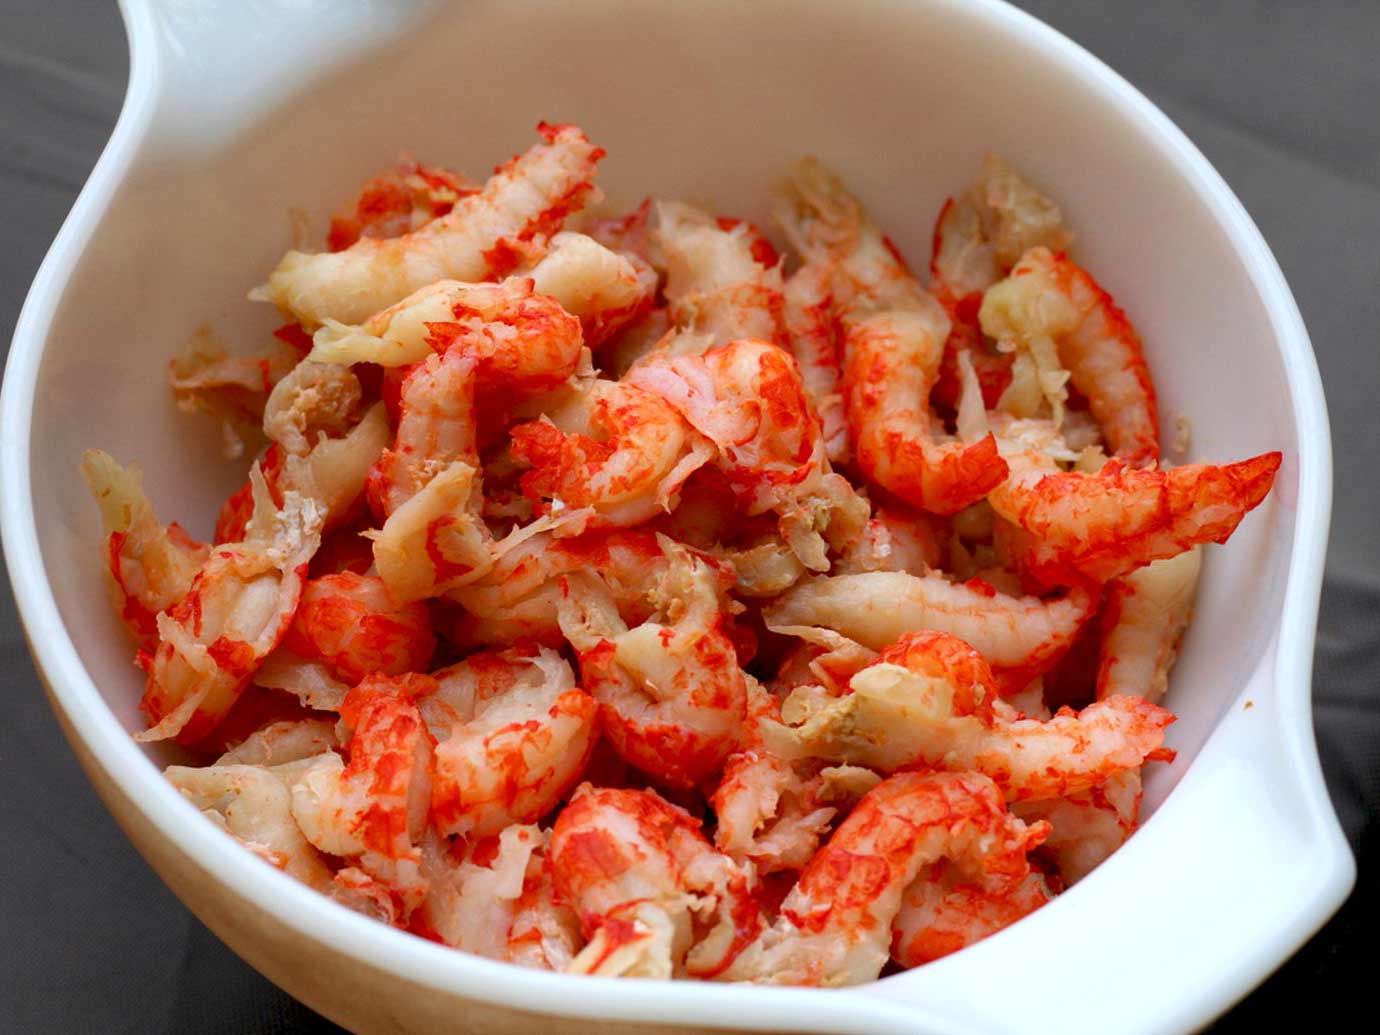 Peeled and boiled crayfish meat.